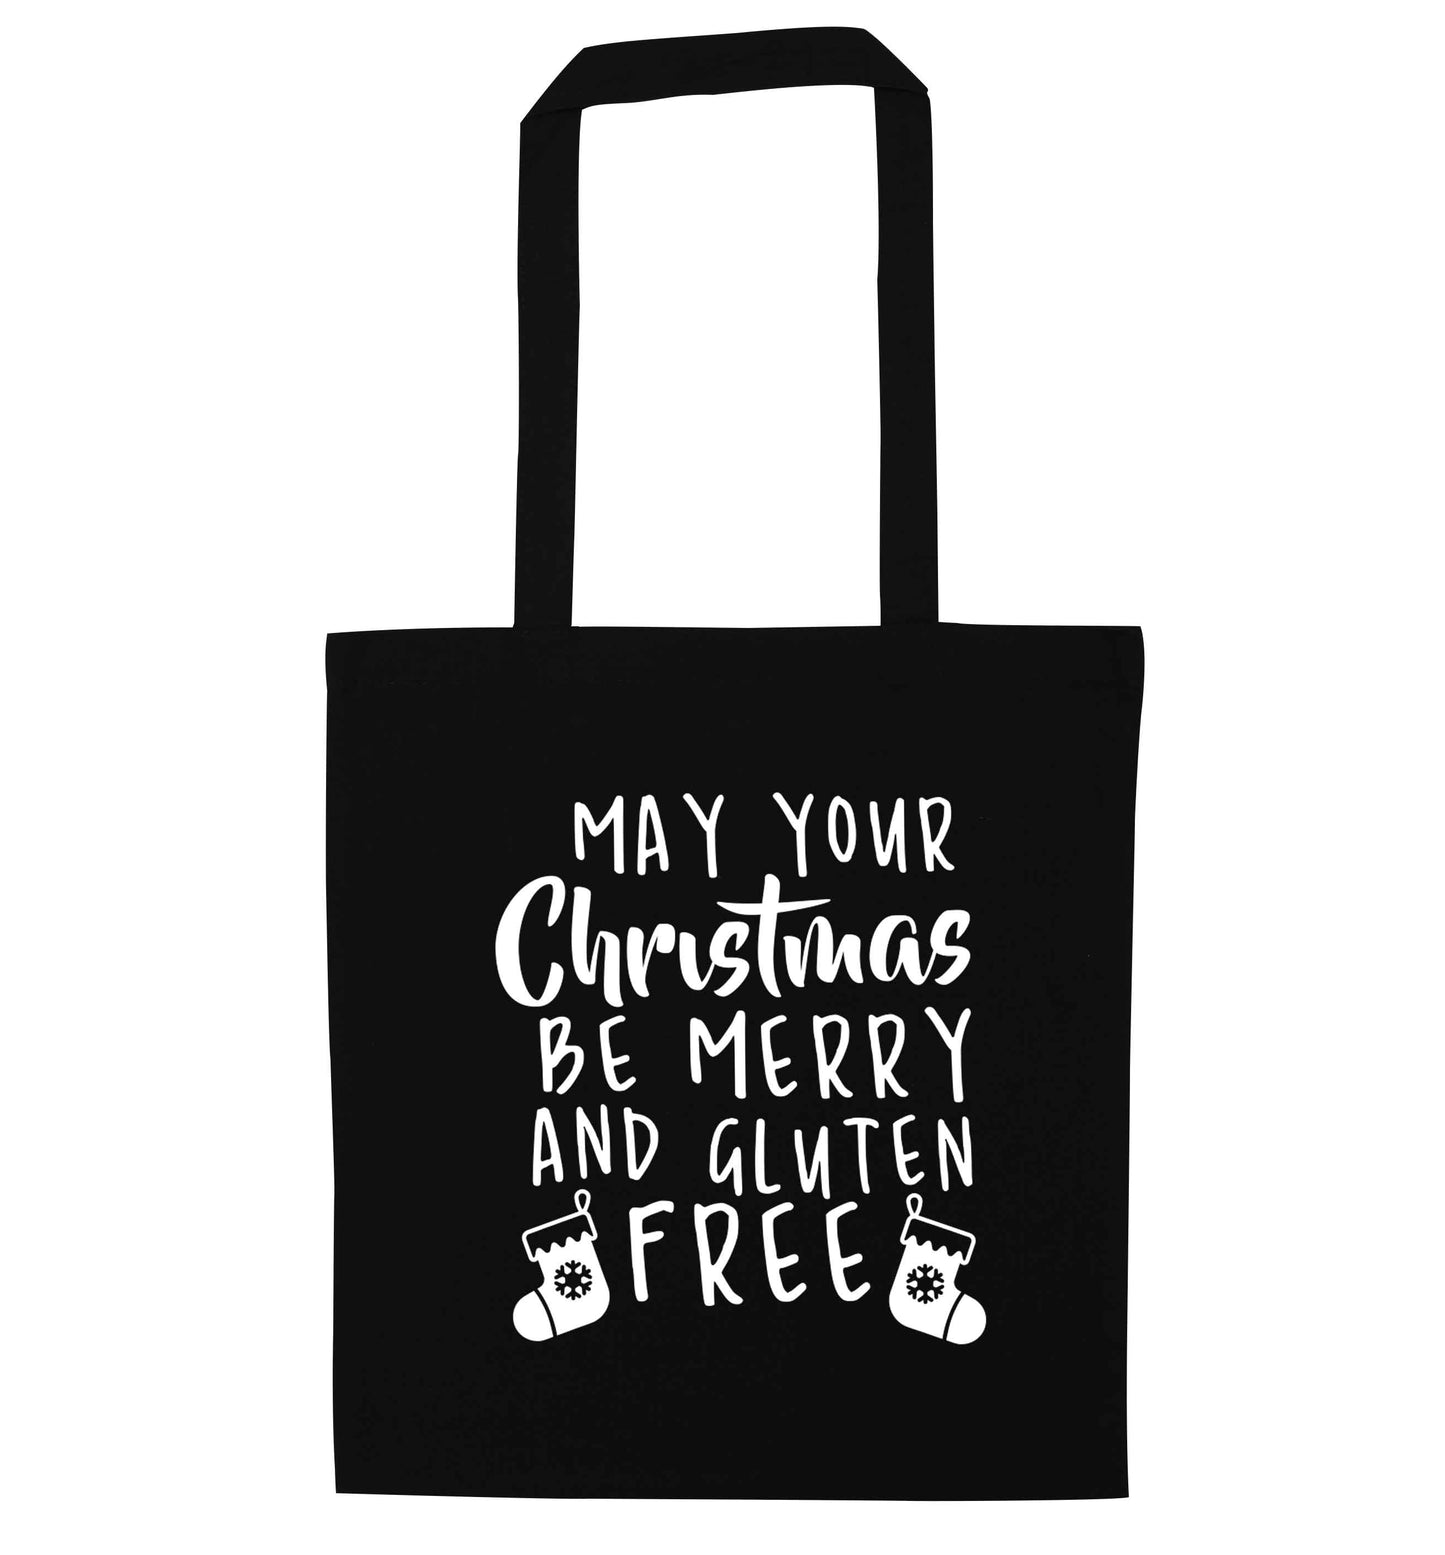 May your Christmas be merry and gluten free black tote bag